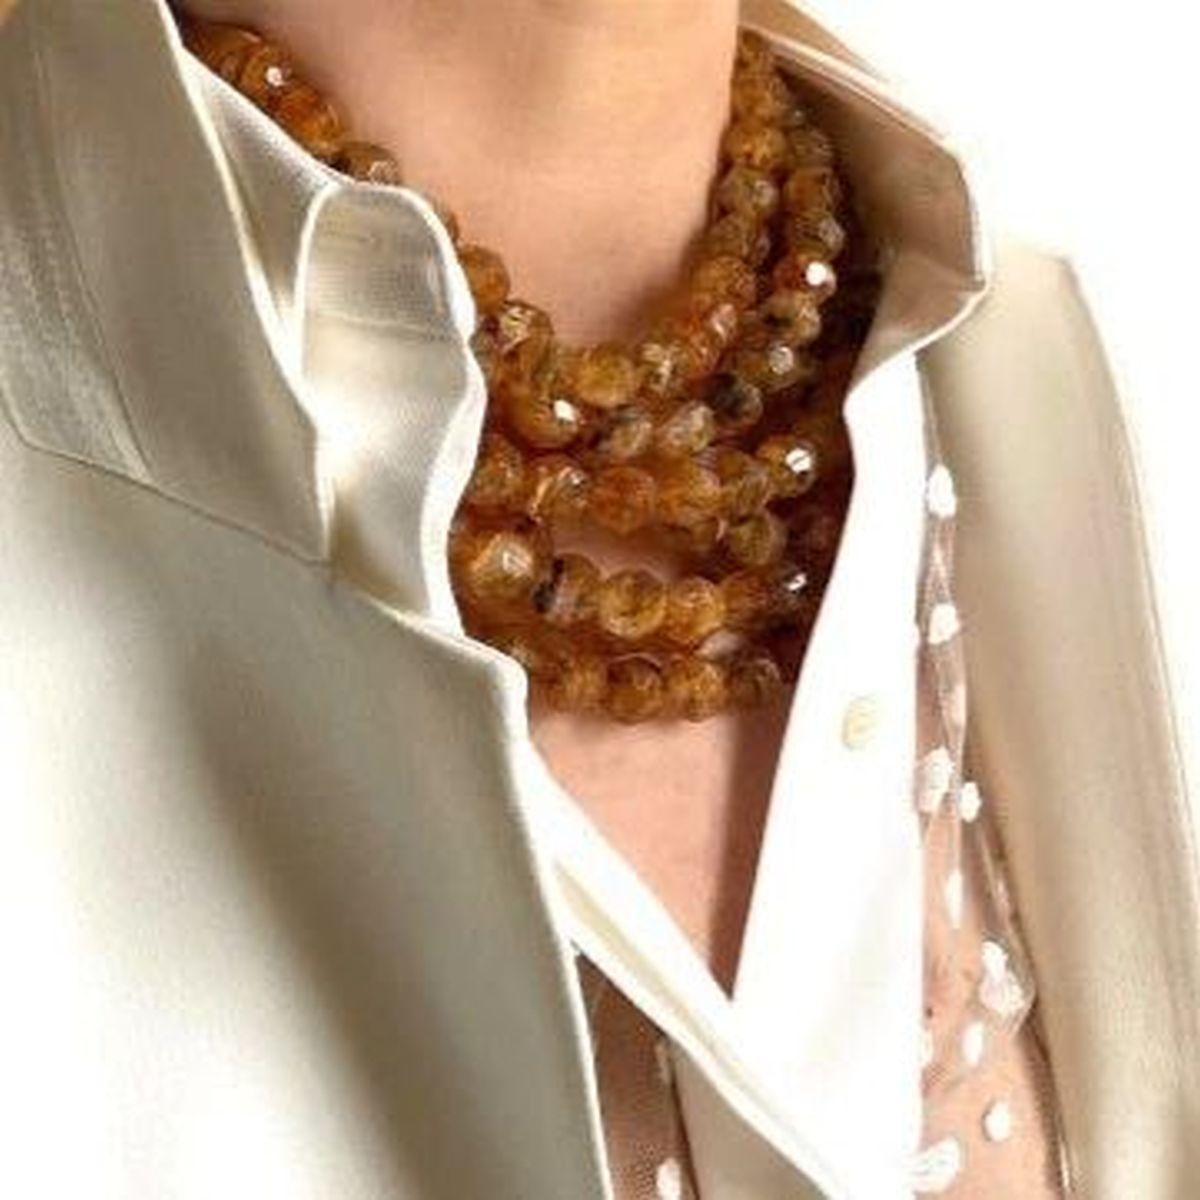 Simply Beautiful! Summer in a Necklace Fairchild Baldwin 12mm Faceted Tortoise Resin Bella 
Lightweight Multi Strand Beads Necklace 
Leather Collar Adjustable magnetic closure Hand crafted in Italy 
Comes with a leather extender and your own